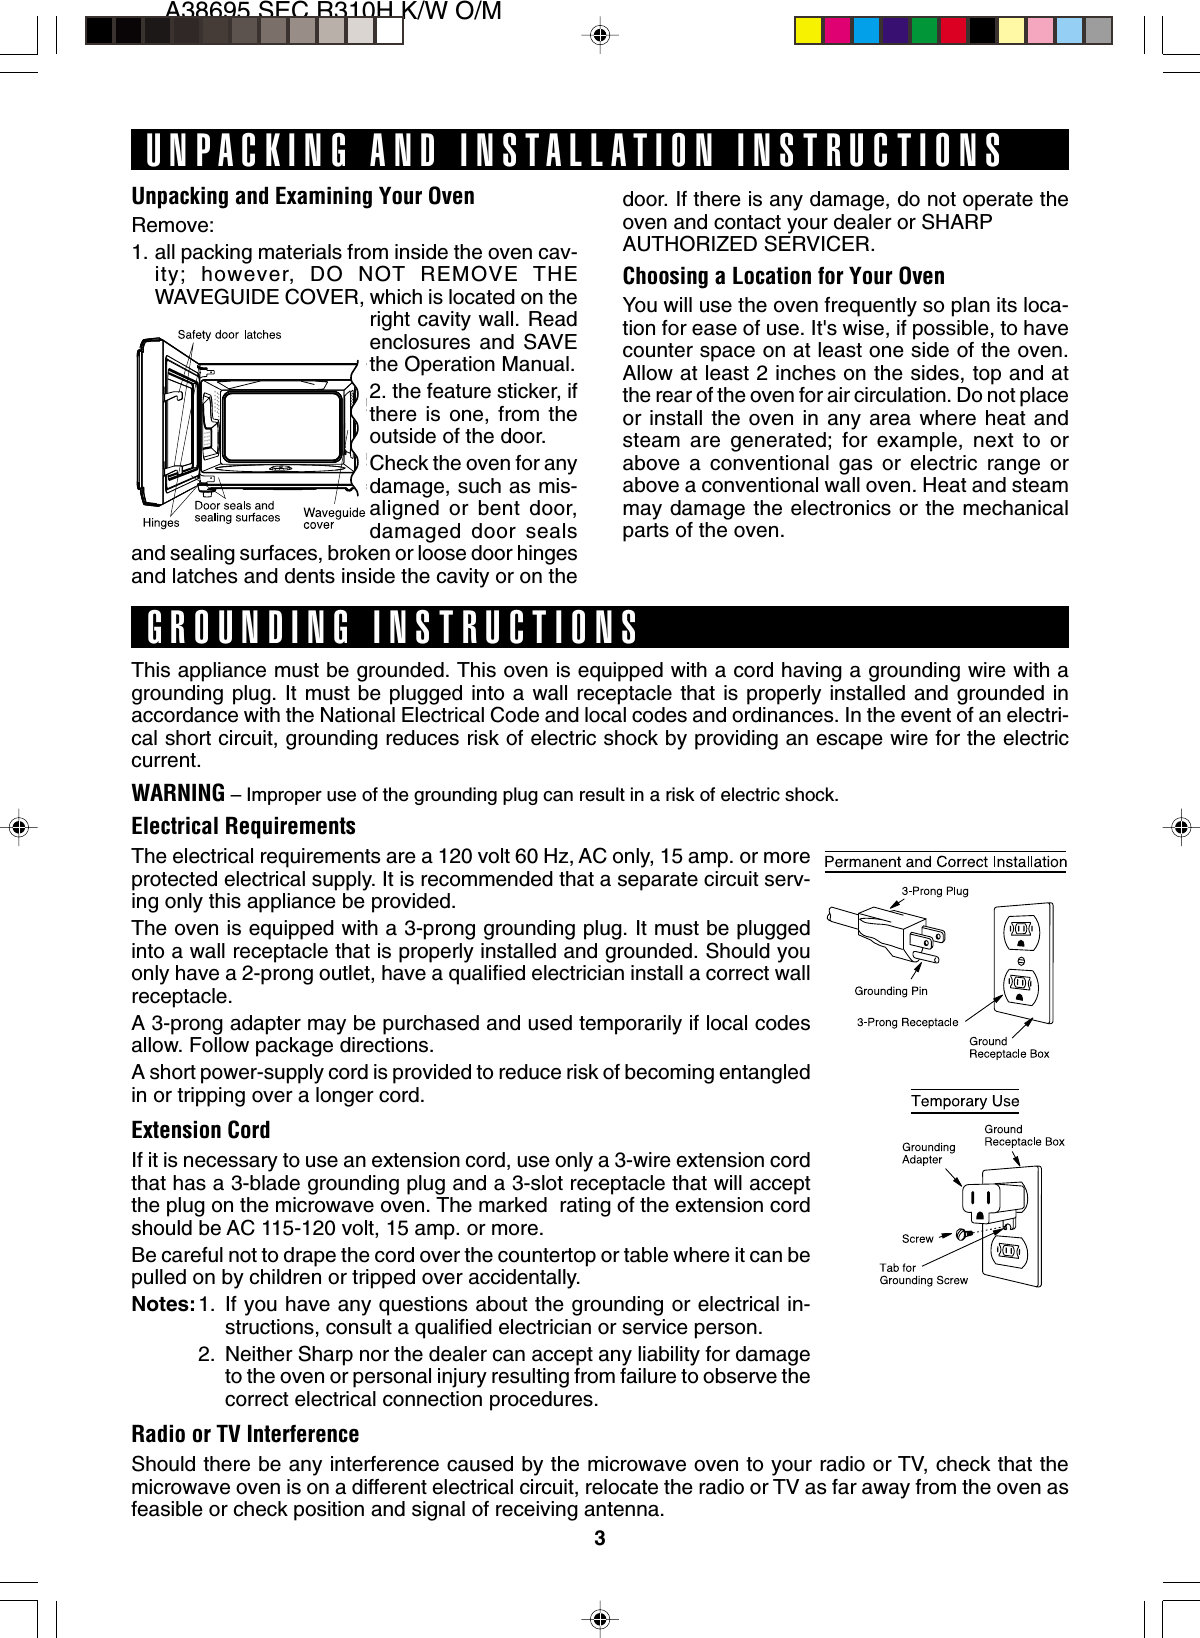 3A38695,SEC R310H K/W O/MUnpacking and Examining Your OvenRemove:1. all packing materials from inside the oven cav-ity; however, DO NOT REMOVE THEWAVEGUIDE COVER, which is located on theright cavity wall. Readenclosures and SAVEthe Operation Manual.2. the feature sticker, ifthere is one, from theoutside of the door.Check the oven for anydamage, such as mis-aligned or bent door,damaged door sealsand sealing surfaces, broken or loose door hingesand latches and dents inside the cavity or on theThis appliance must be grounded. This oven is equipped with a cord having a grounding wire with agrounding plug. It must be plugged into a wall receptacle that is properly installed and grounded inaccordance with the National Electrical Code and local codes and ordinances. In the event of an electri-cal short circuit, grounding reduces risk of electric shock by providing an escape wire for the electriccurrent.WARNING – Improper use of the grounding plug can result in a risk of electric shock.Electrical RequirementsThe electrical requirements are a 120 volt 60 Hz, AC only, 15 amp. or moreprotected electrical supply. It is recommended that a separate circuit serv-ing only this appliance be provided.The oven is equipped with a 3-prong grounding plug. It must be pluggedinto a wall receptacle that is properly installed and grounded. Should youonly have a 2-prong outlet, have a qualified electrician install a correct wallreceptacle.A 3-prong adapter may be purchased and used temporarily if local codesallow. Follow package directions.A short power-supply cord is provided to reduce risk of becoming entangledin or tripping over a longer cord.Extension CordIf it is necessary to use an extension cord, use only a 3-wire extension cordthat has a 3-blade grounding plug and a 3-slot receptacle that will acceptthe plug on the microwave oven. The marked  rating of the extension cordshould be AC 115-120 volt, 15 amp. or more.Be careful not to drape the cord over the countertop or table where it can bepulled on by children or tripped over accidentally.Notes:1. If you have any questions about the grounding or electrical in-structions, consult a qualified electrician or service person.2. Neither Sharp nor the dealer can accept any liability for damageto the oven or personal injury resulting from failure to observe thecorrect electrical connection procedures.Radio or TV InterferenceShould there be any interference caused by the microwave oven to your radio or TV, check that themicrowave oven is on a different electrical circuit, relocate the radio or TV as far away from the oven asfeasible or check position and signal of receiving antenna.UNPACKING AND INSTALLATION INSTRUCTIONSGROUNDING INSTRUCTIONSdoor. If there is any damage, do not operate theoven and contact your dealer or SHARPAUTHORIZED SERVICER.Choosing a Location for Your OvenYou will use the oven frequently so plan its loca-tion for ease of use. It&apos;s wise, if possible, to havecounter space on at least one side of the oven.Allow at least 2 inches on the sides, top and atthe rear of the oven for air circulation. Do not placeor install the oven in any area where heat andsteam are generated; for example, next to orabove a conventional gas or electric range orabove a conventional wall oven. Heat and steammay damage the electronics or the mechanicalparts of the oven.